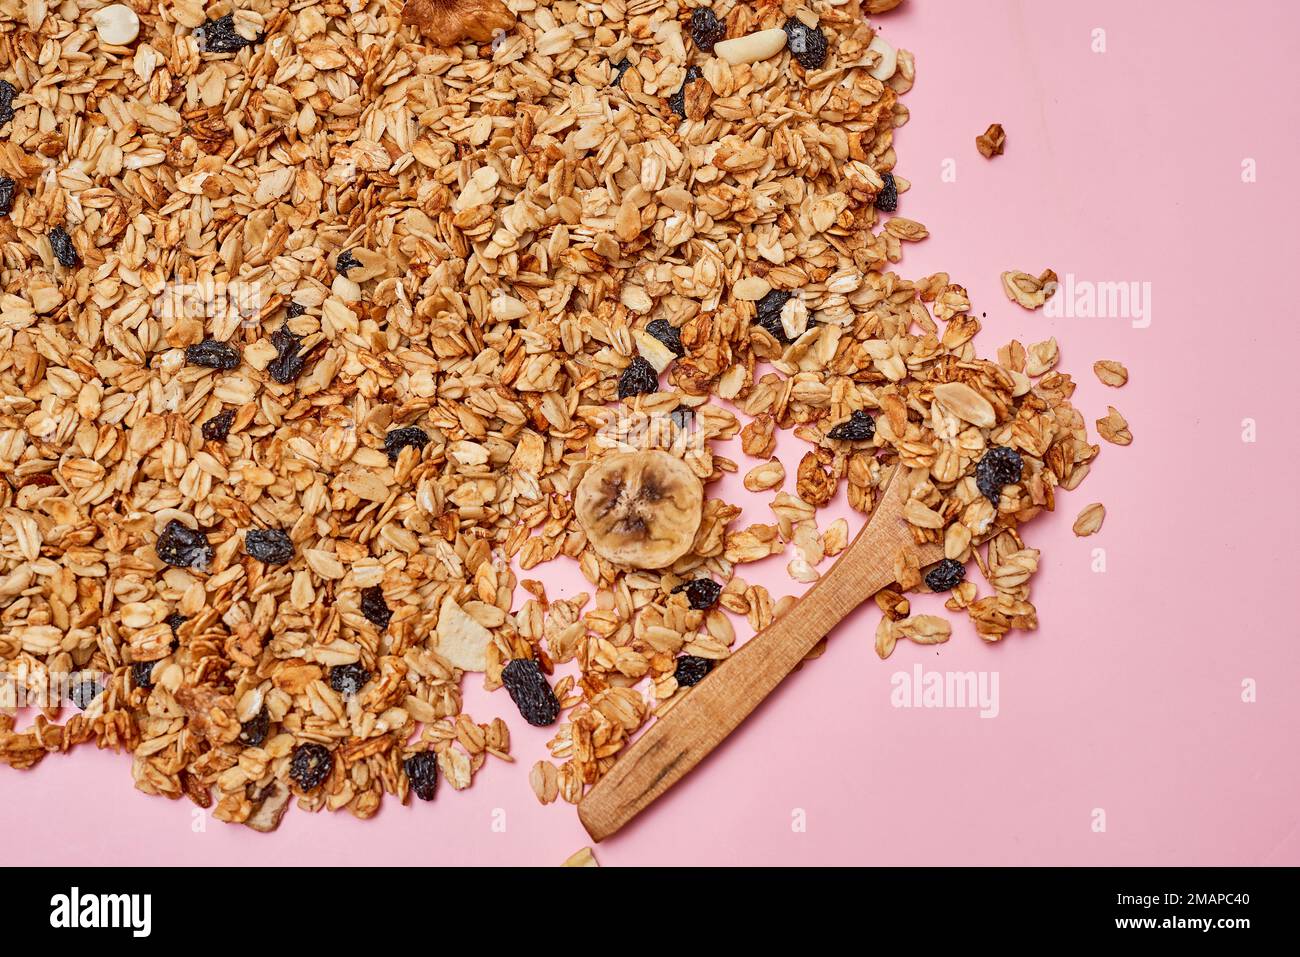 oats on a pink surface with a wooden spoon in the background and an image of blueberries, almonds, and nuts Stock Photo